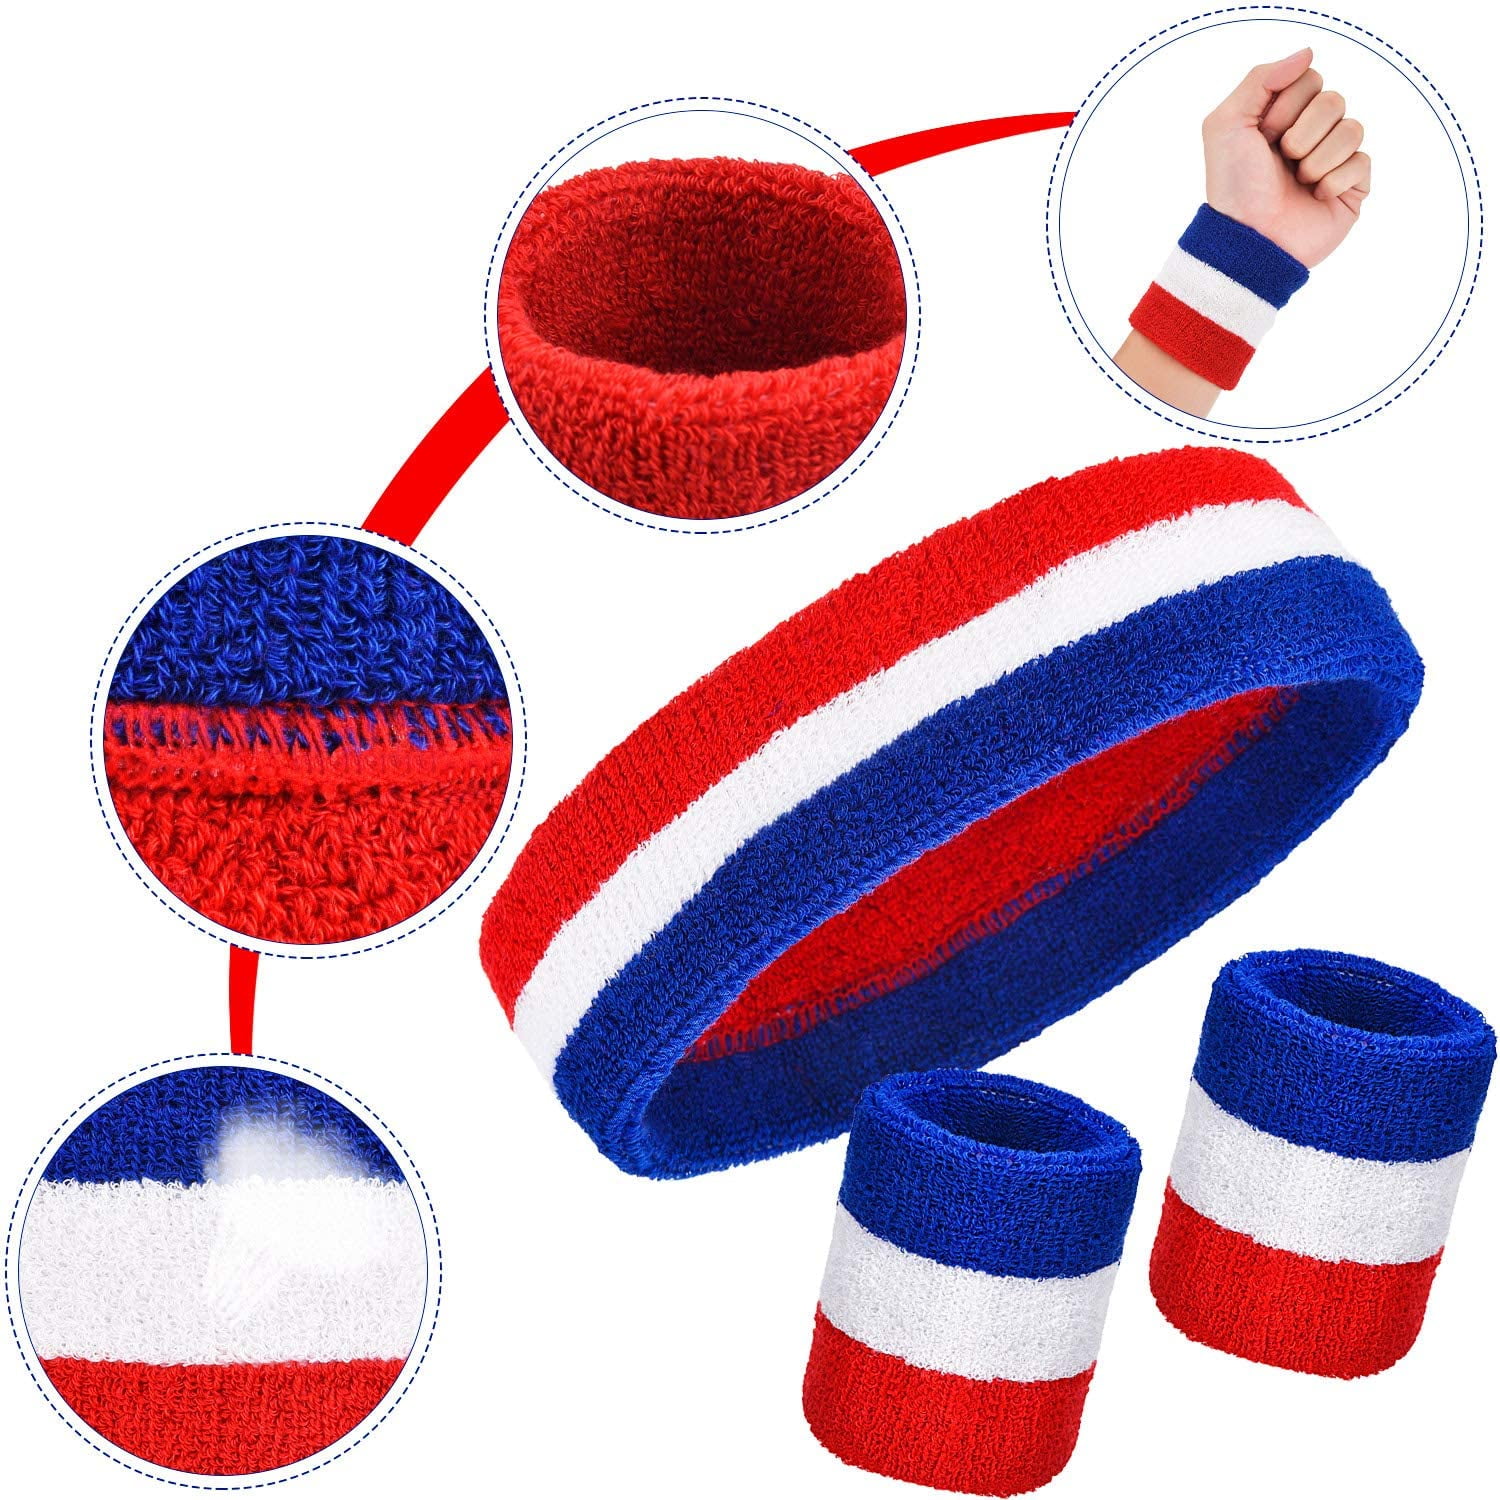 15 Pieces Striped Sweatbands Set Includes 5 Pieces Sports Headband And 10 Set 